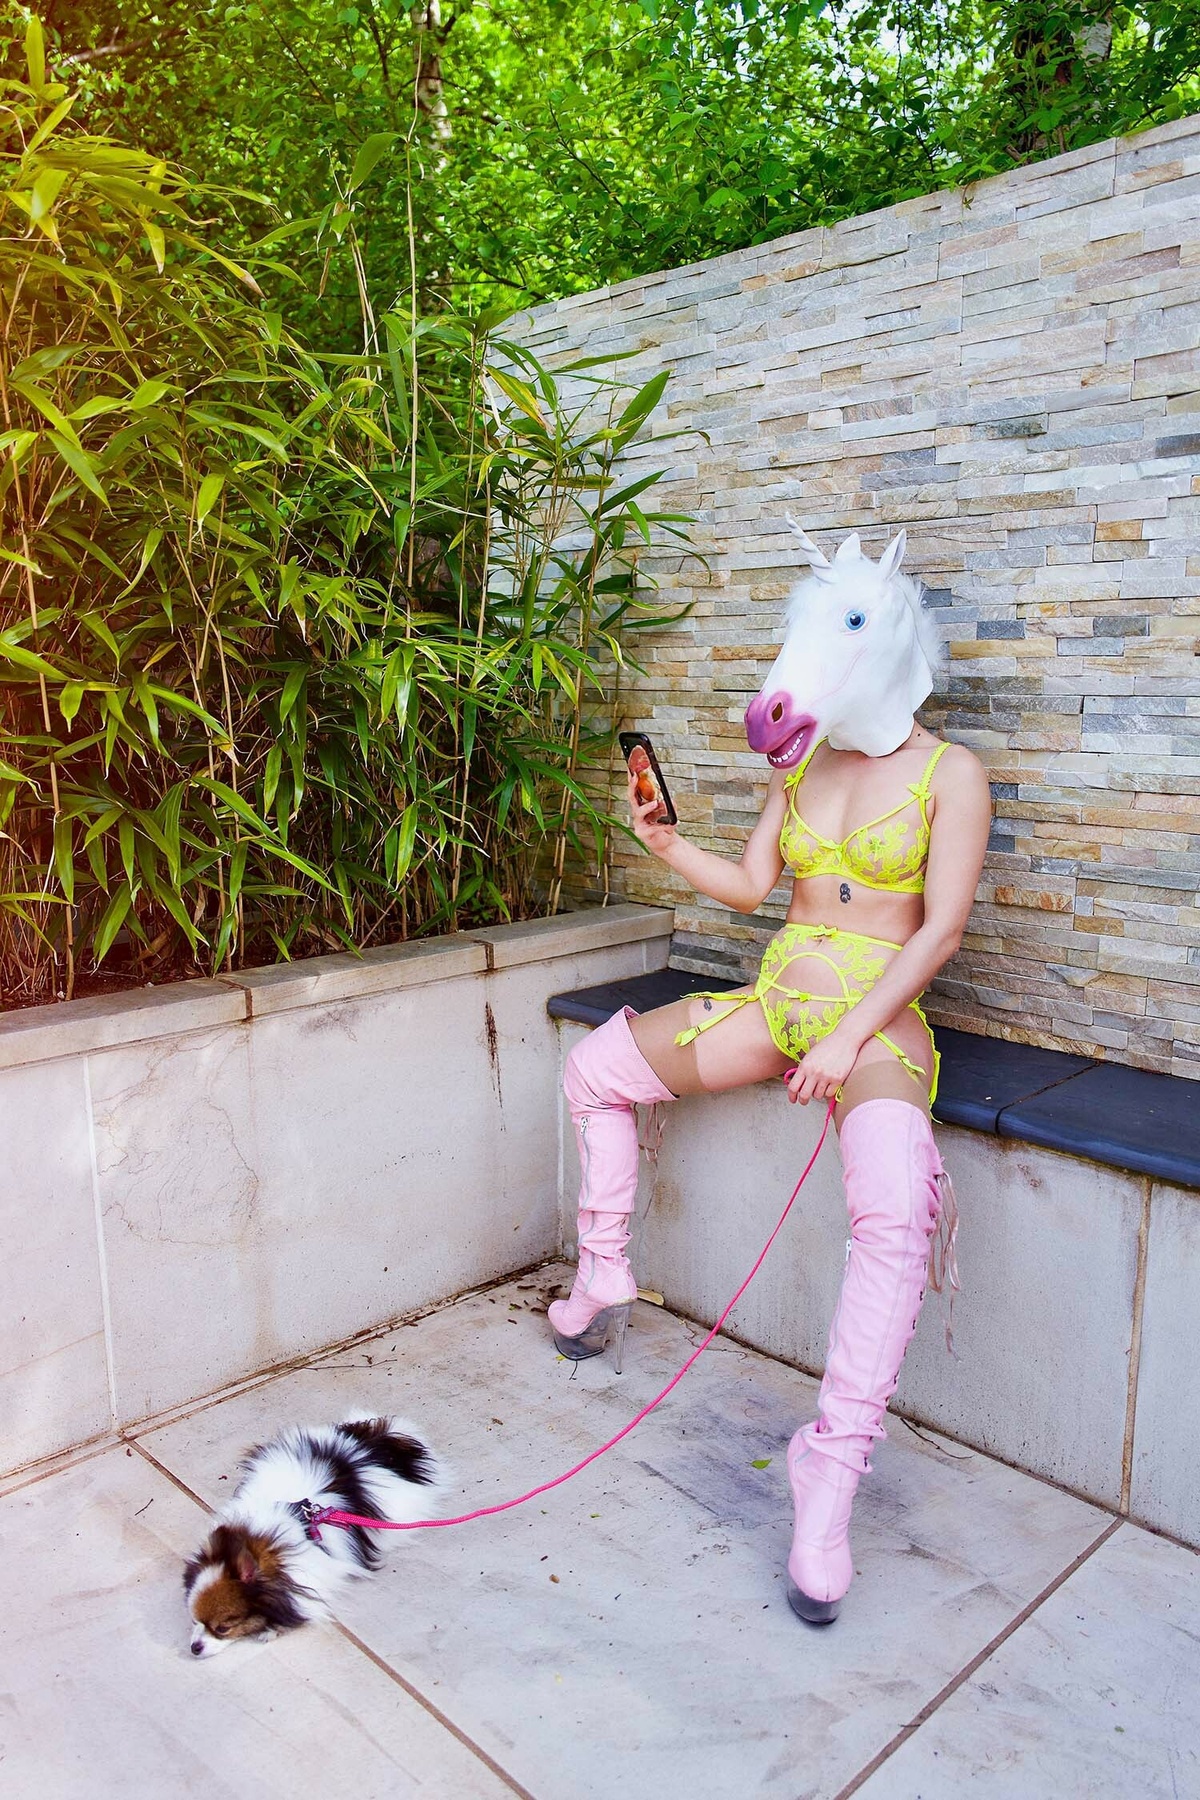 Femme Castratice wearing a unicorn head, yellow lingerie, with a small dog on a lead sits casually on a garden seat.